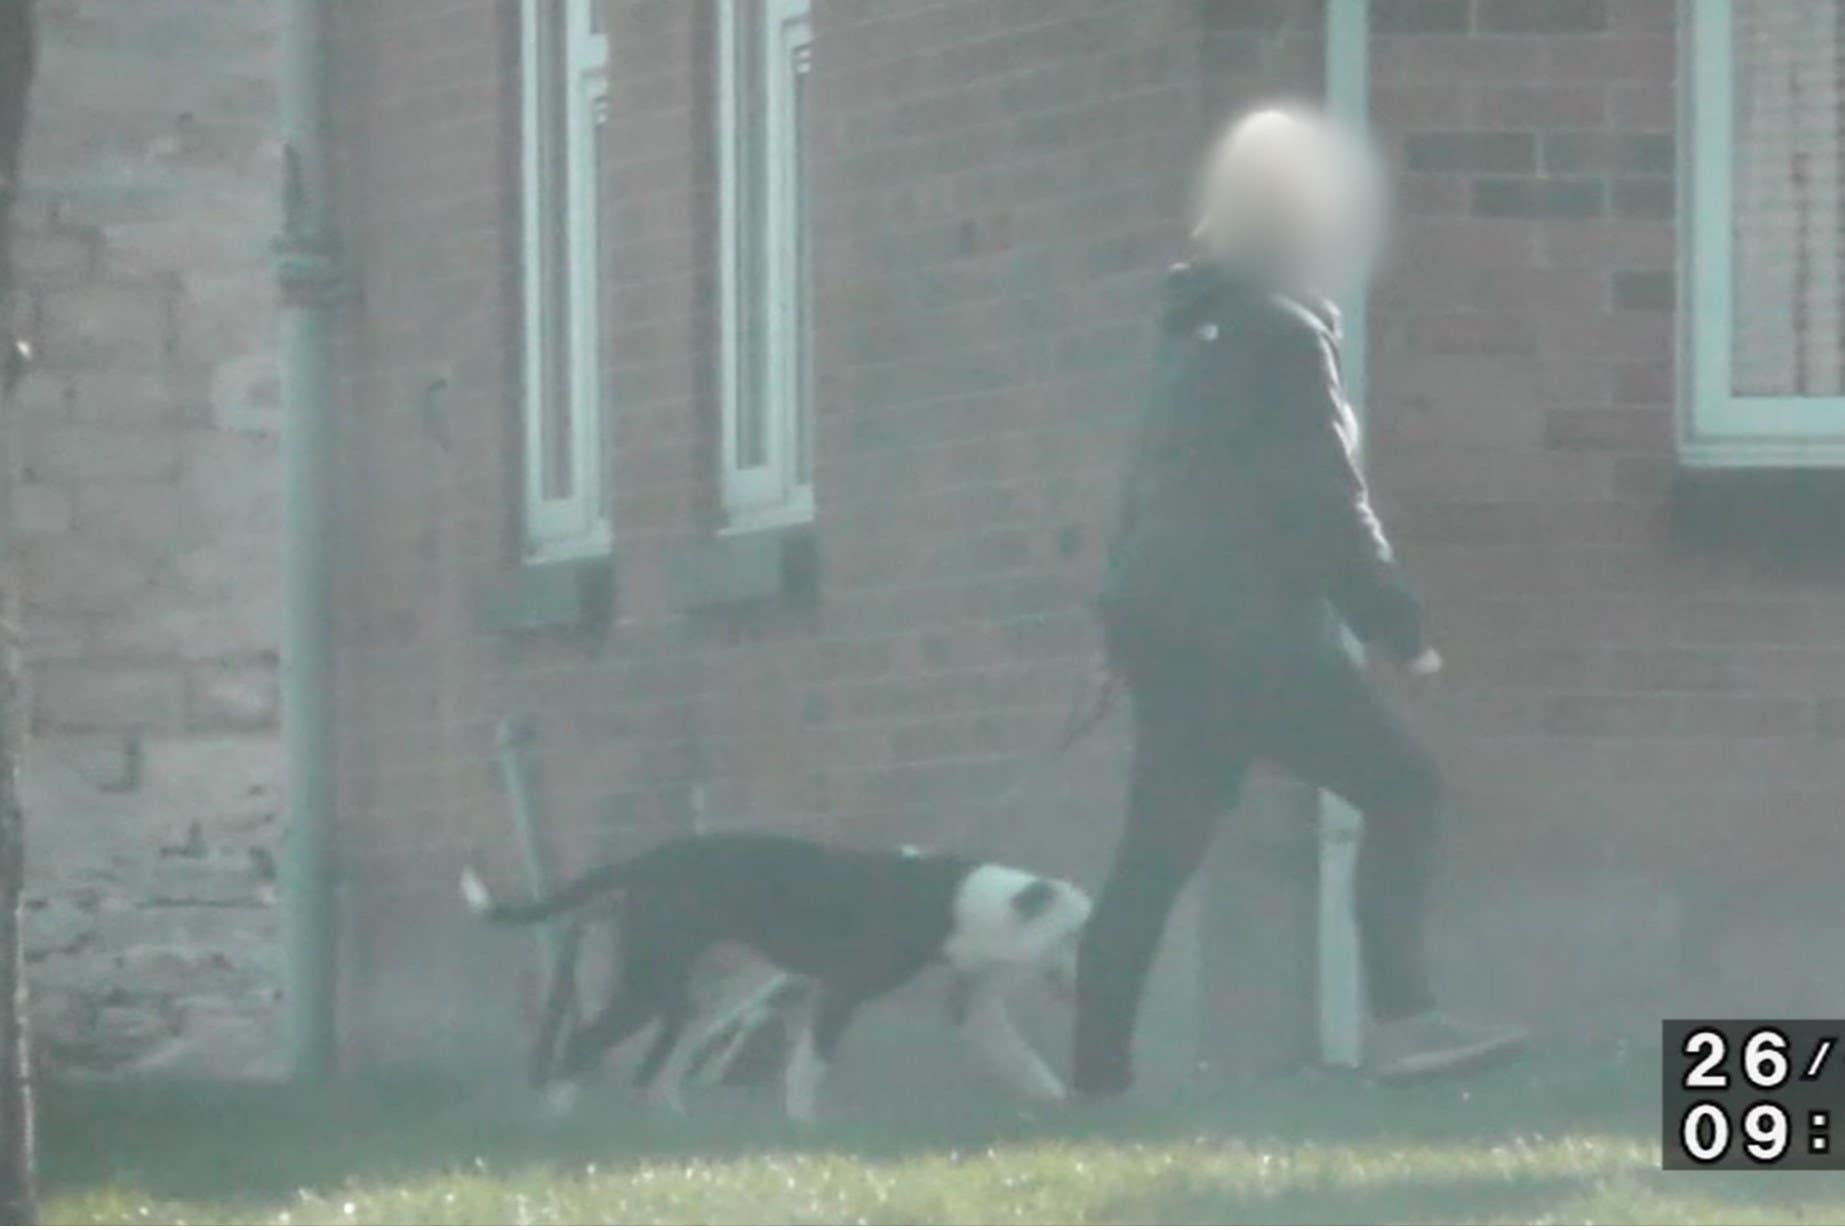 Footage showed Rogers walking unaided before her medical assessment (City of London Police)